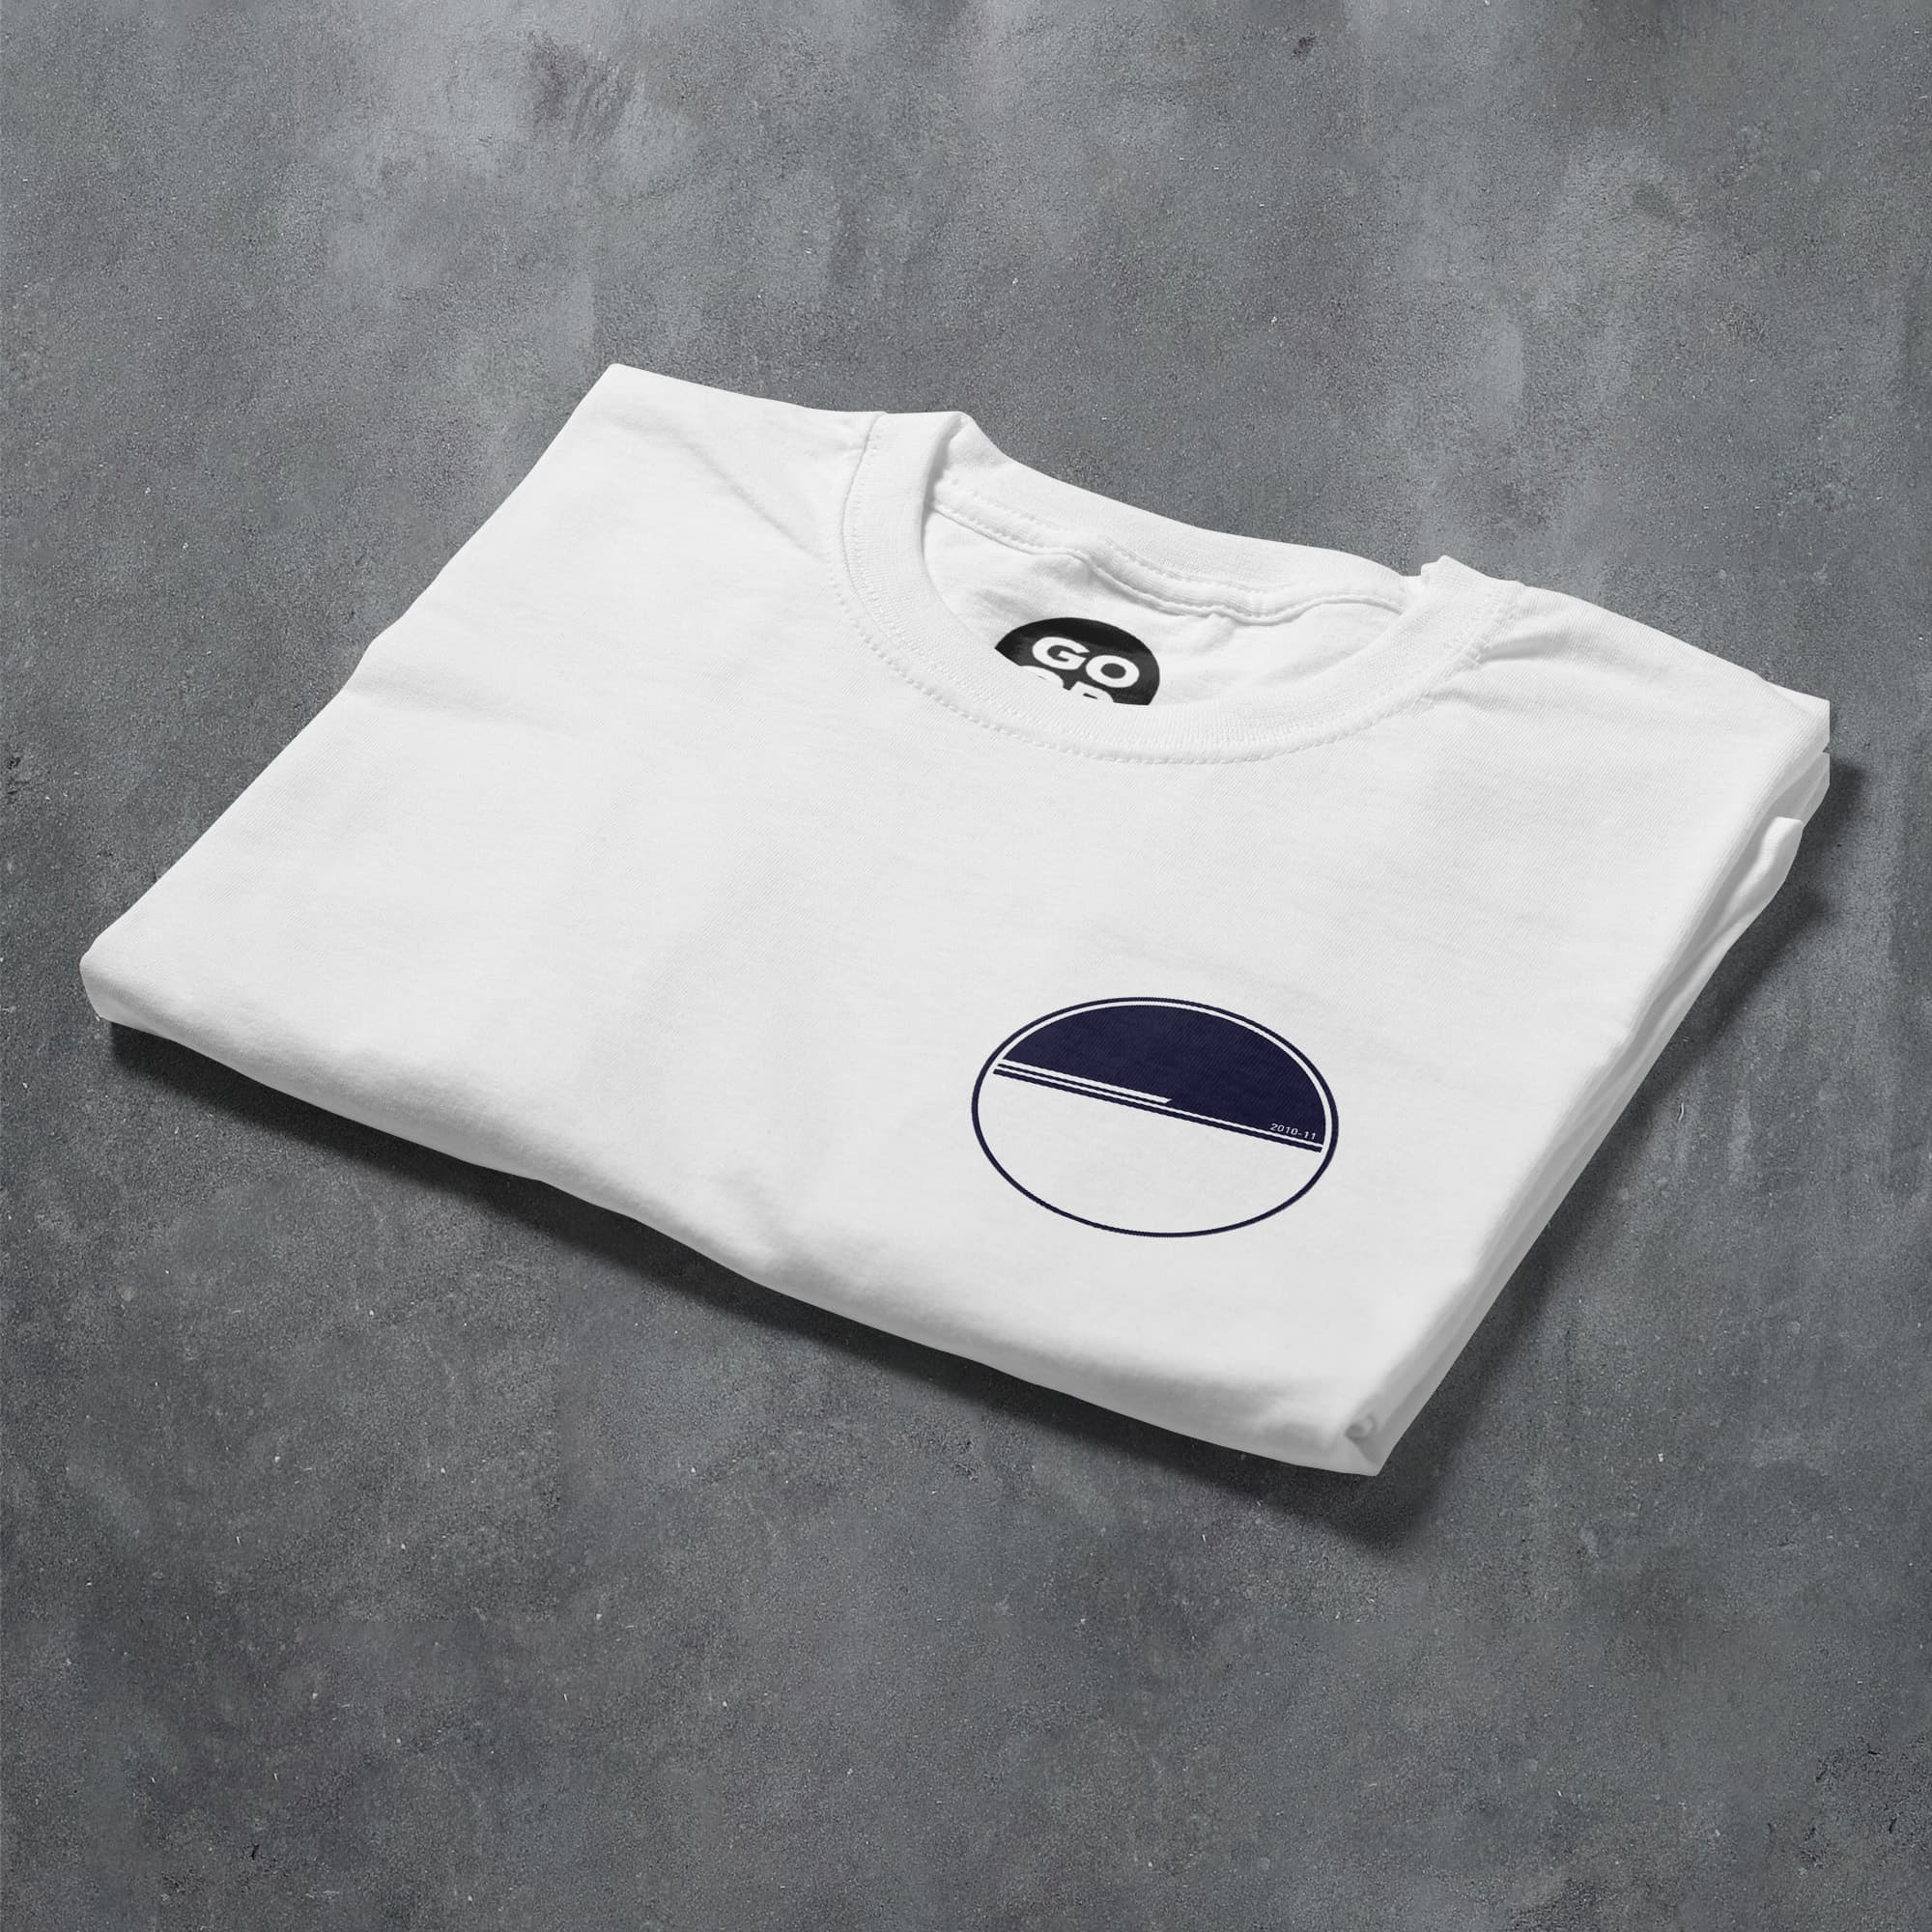 a white t - shirt with a blue circle on it